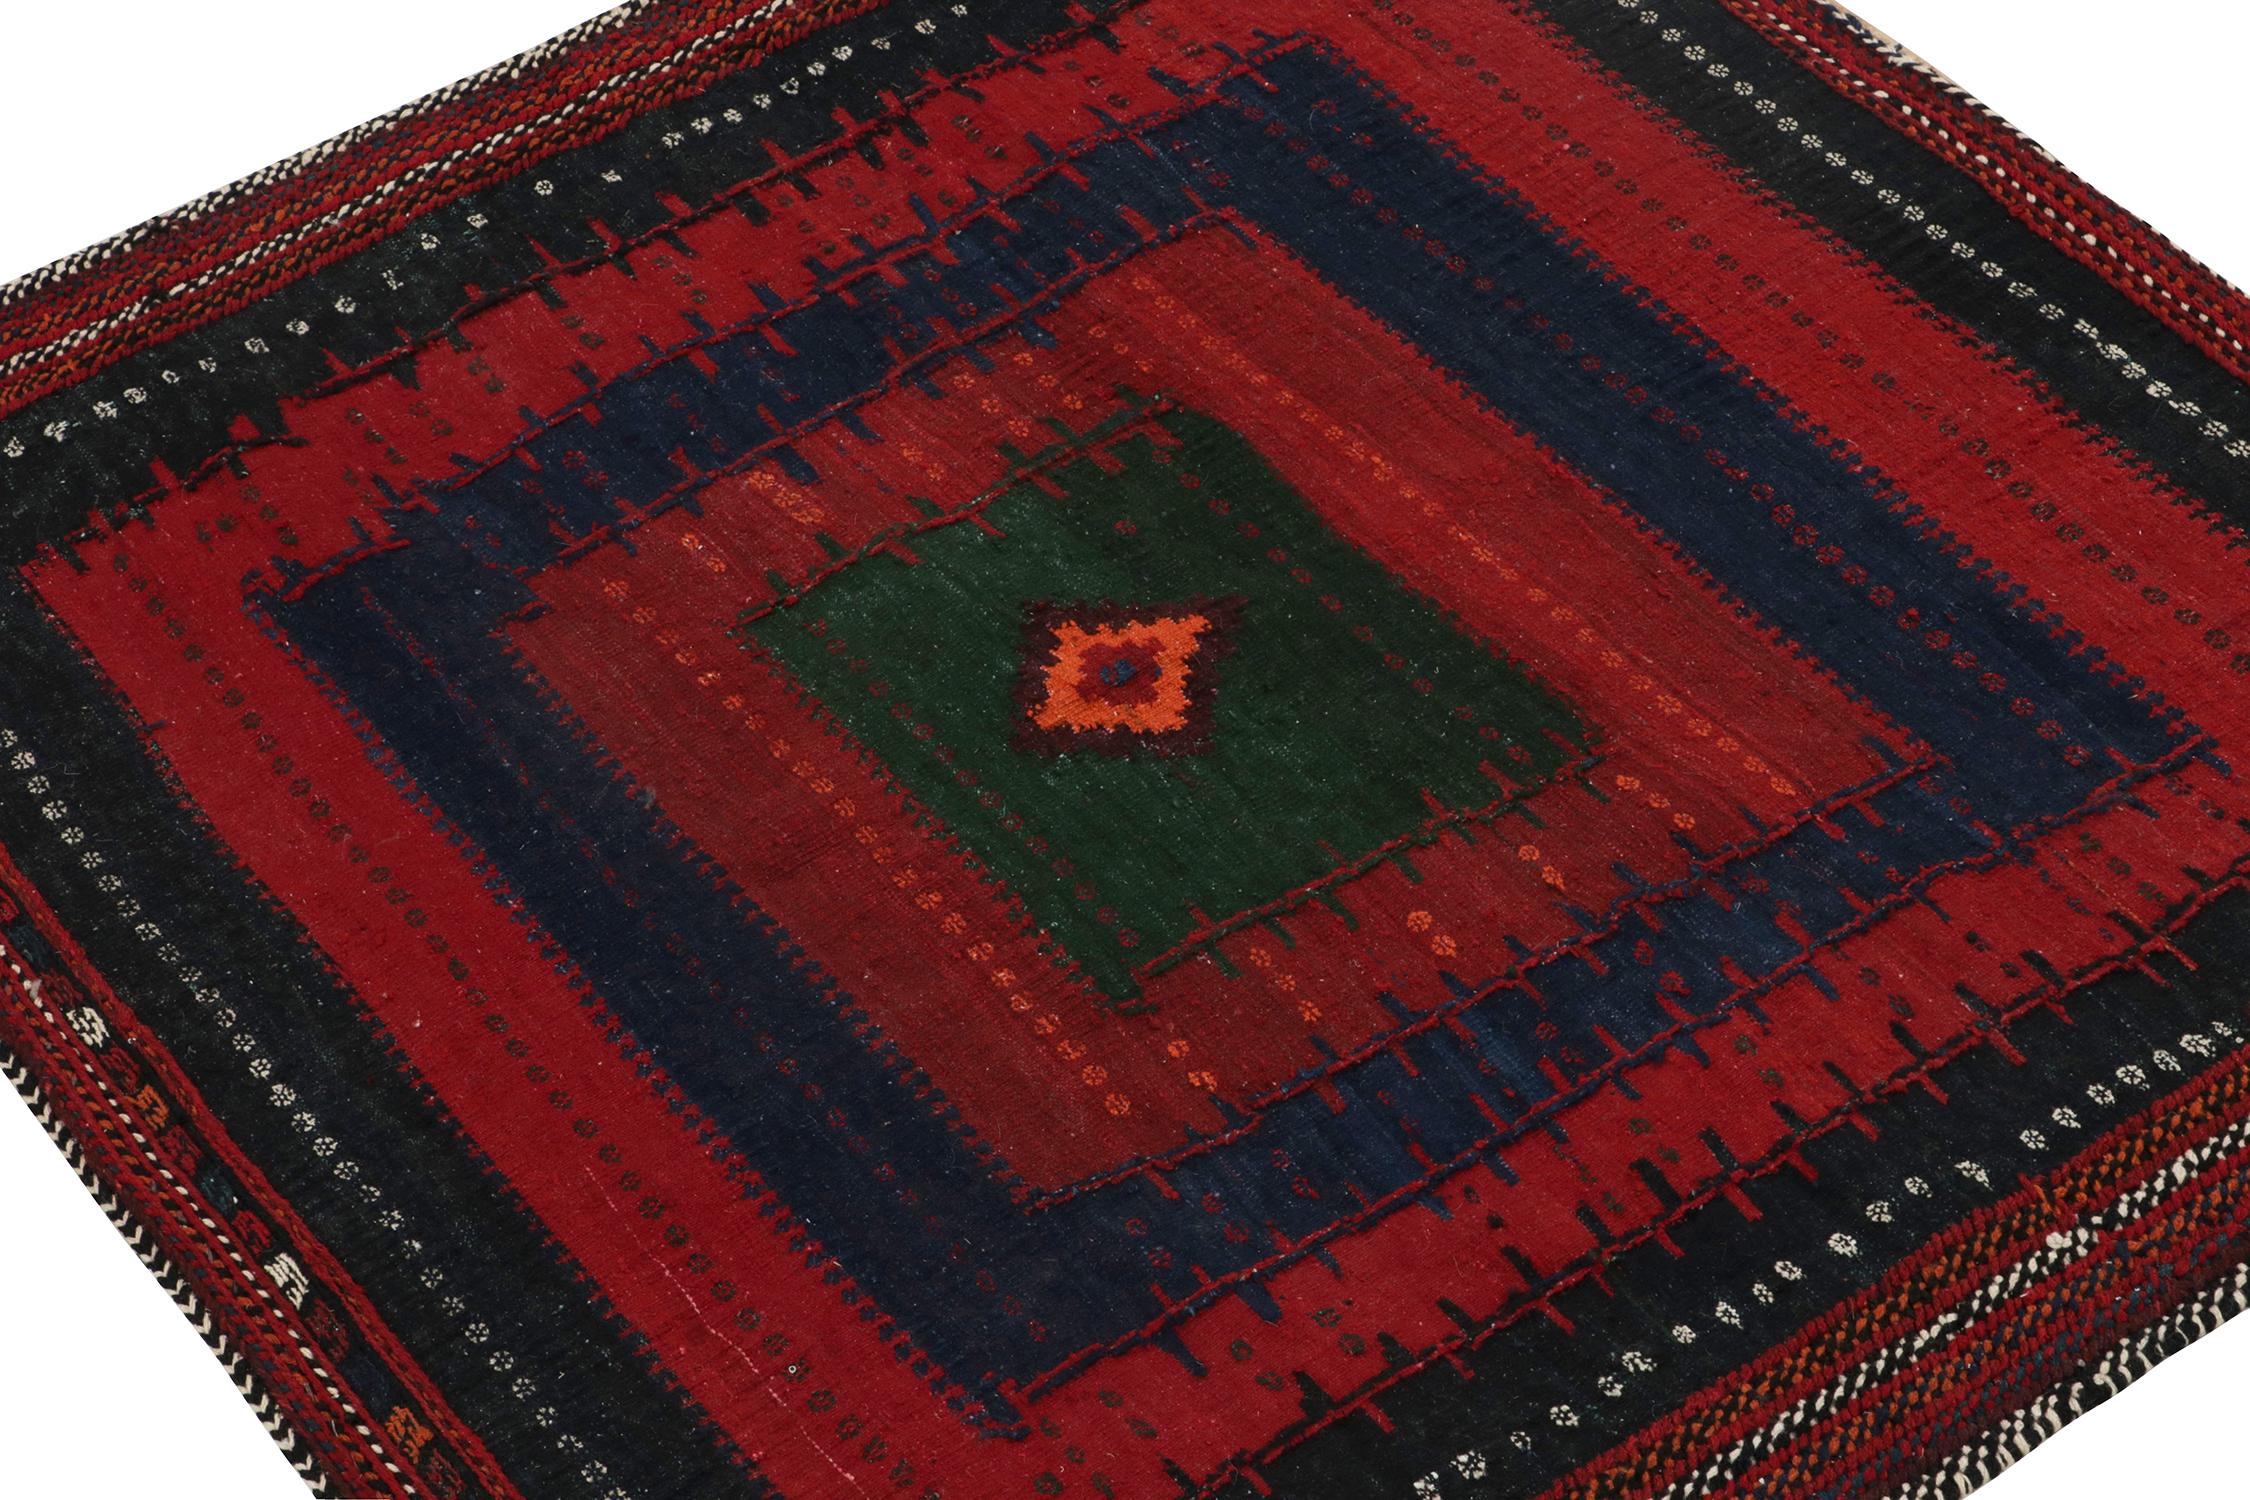 Persian Vintage Sofreh Kilim Rug in Red, Green, Tribal Geometric Pattern by Rug & Kilim For Sale